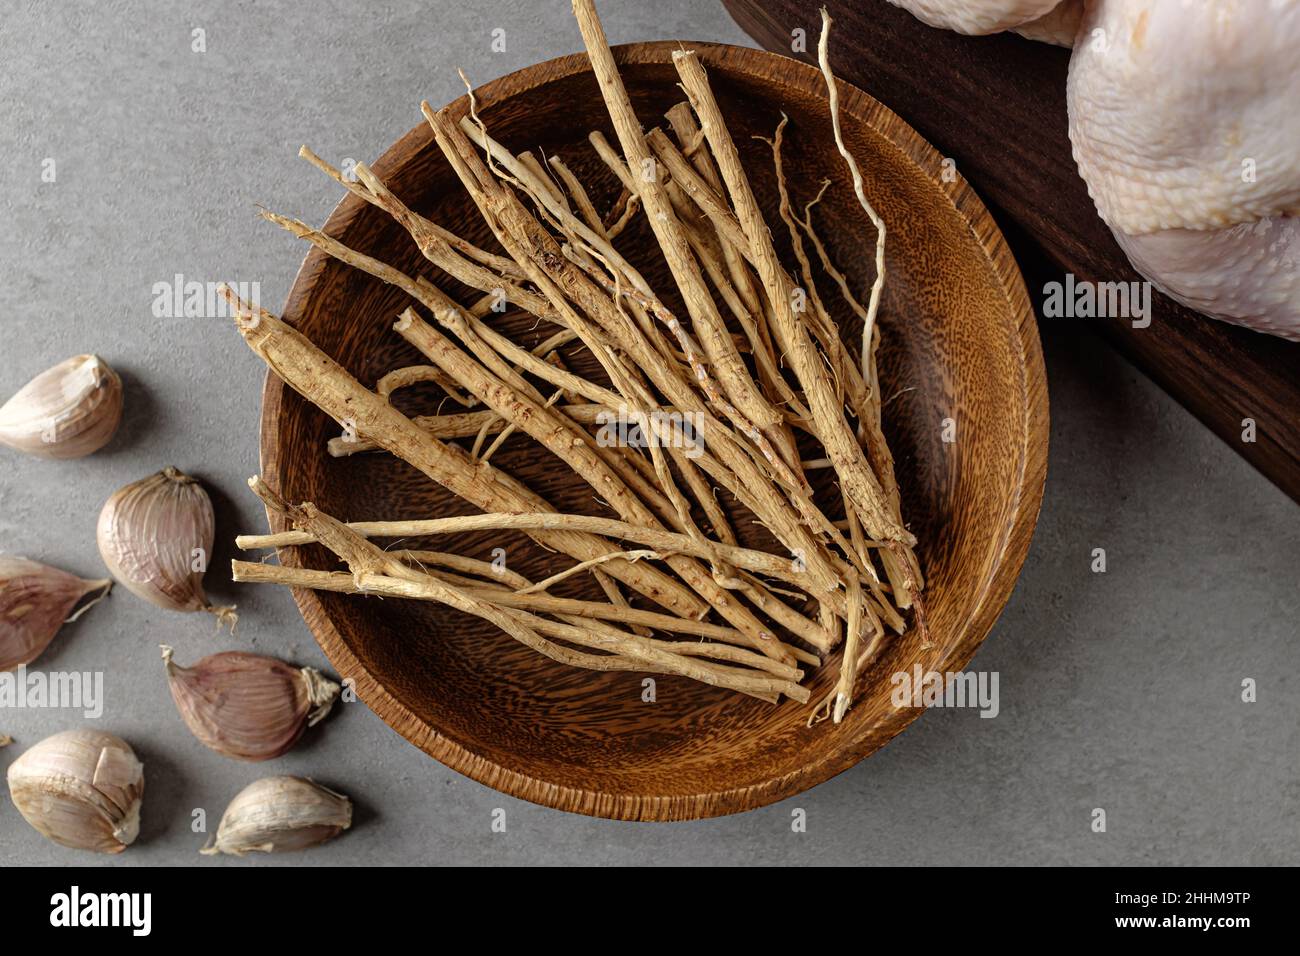 Astragalus root, dried and hardened Stock Photo